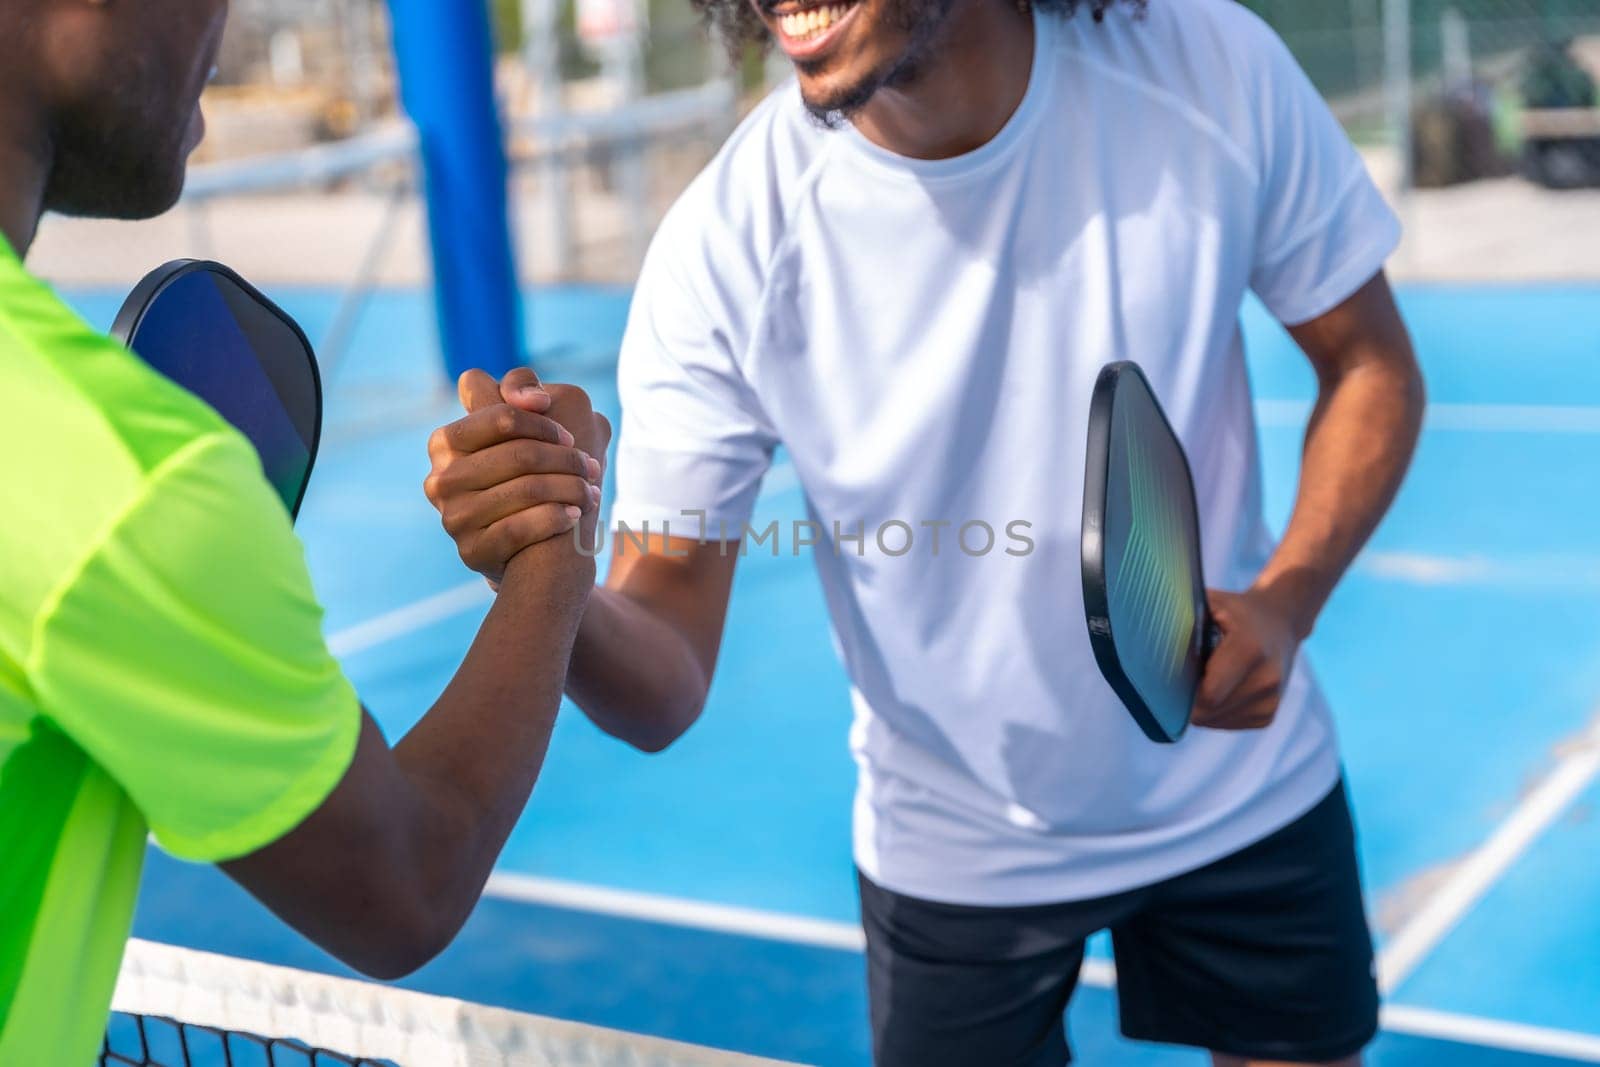 Pickleball rivals shaking hands before playing a match by Huizi